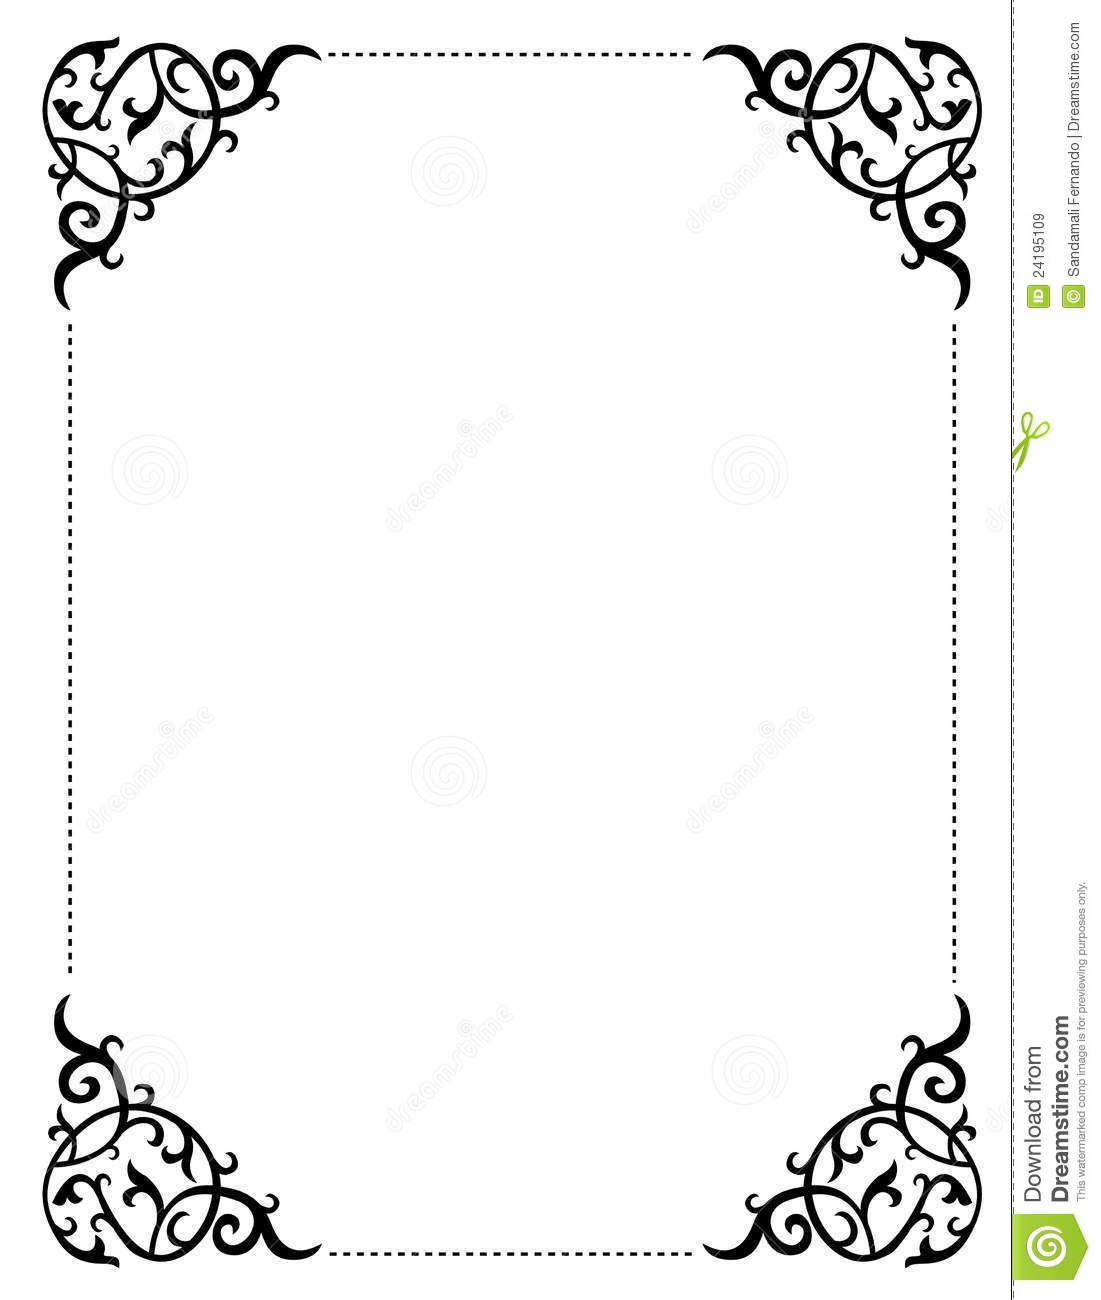 Free Printable Wedding Clip Art Borders And Backgrounds Invitation - Free Printable Halloween Stationery Borders